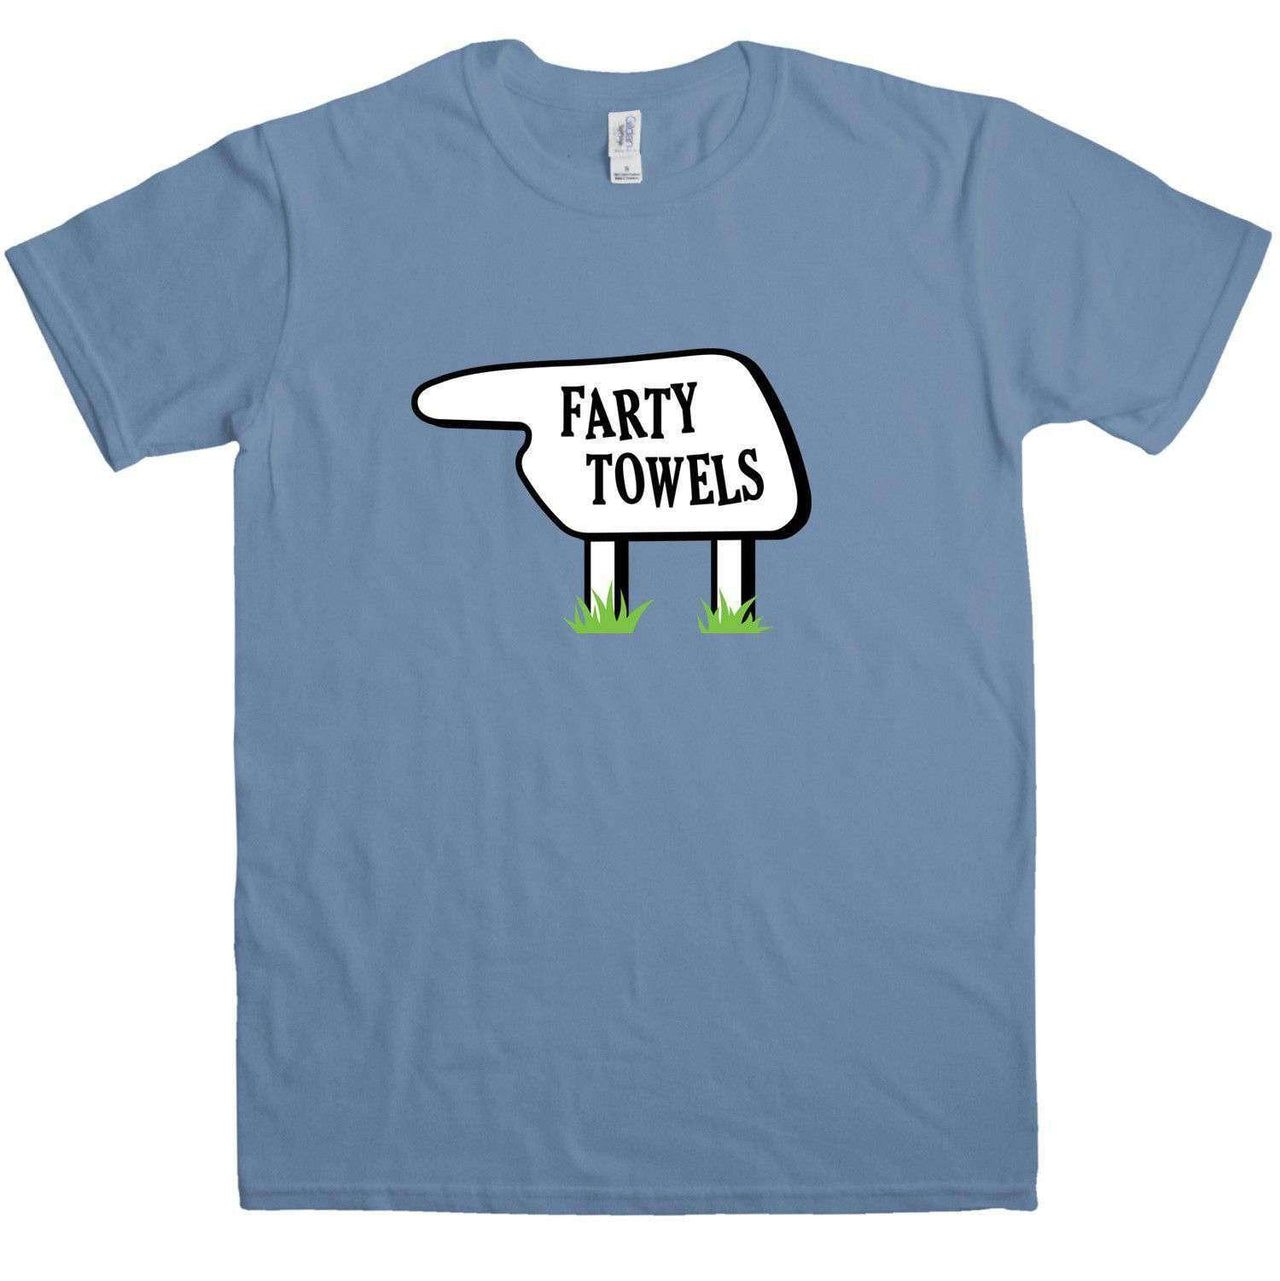 Farty Towels Unisex T-Shirt For Men And Women 8Ball